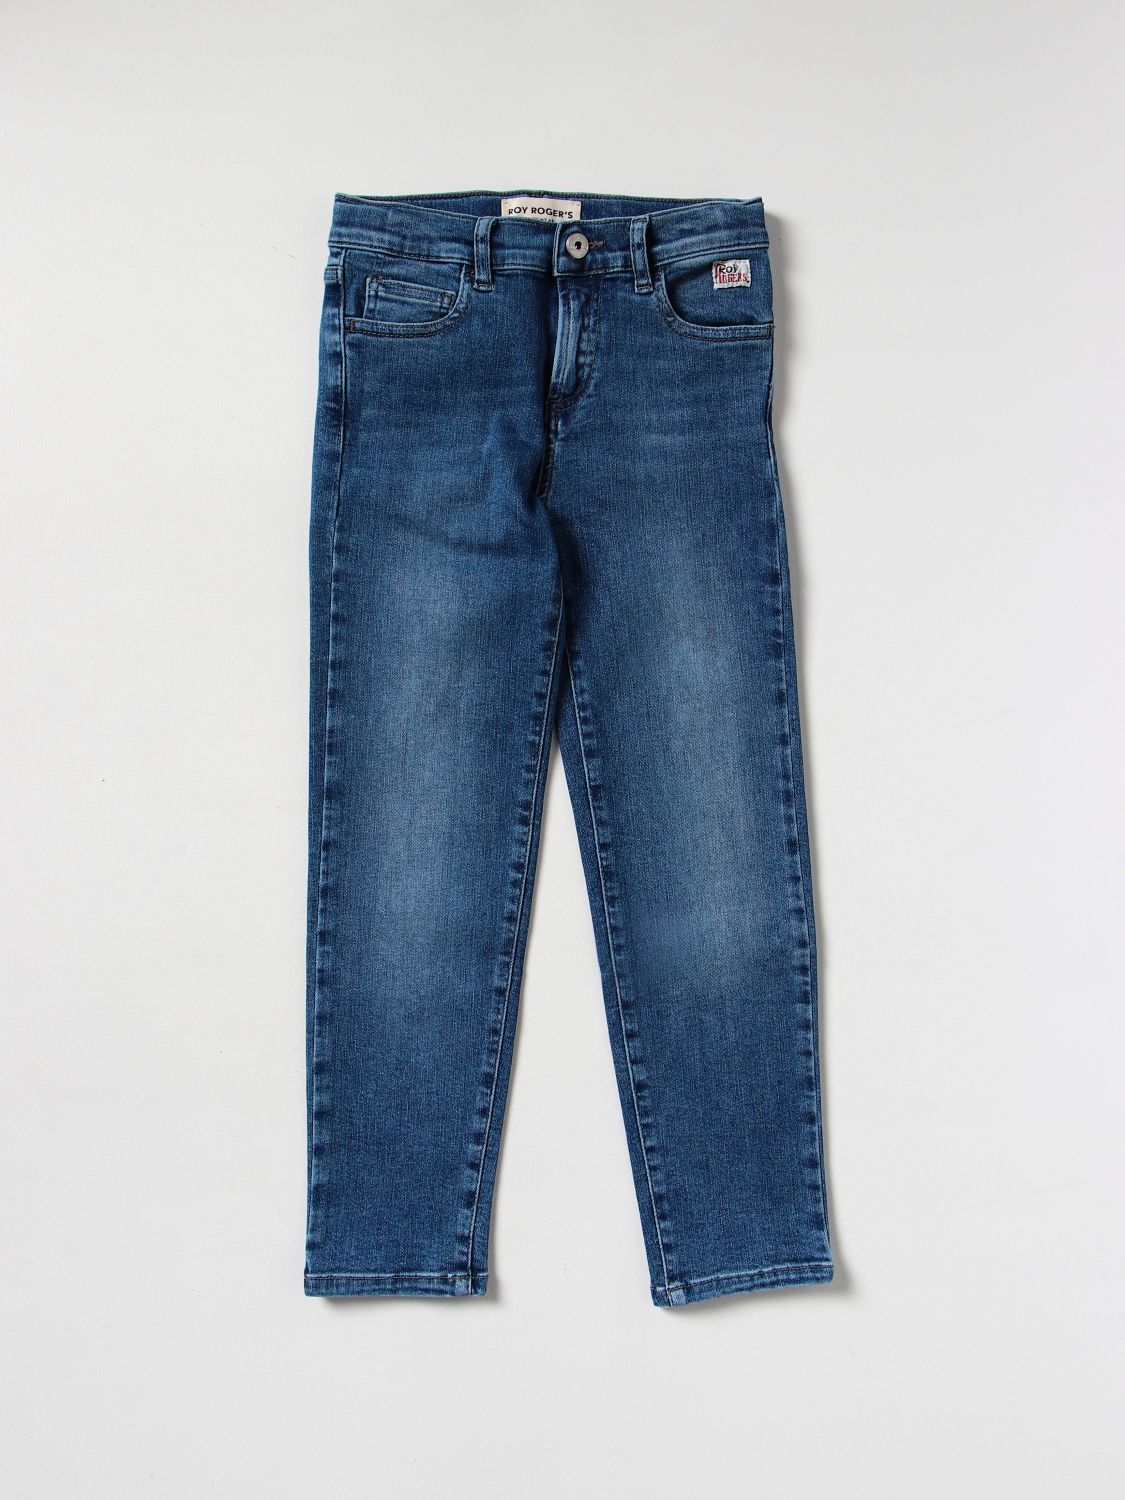 Jeans Roy Rogers: Jeans Roy Rogers a 5 tasche denim 1